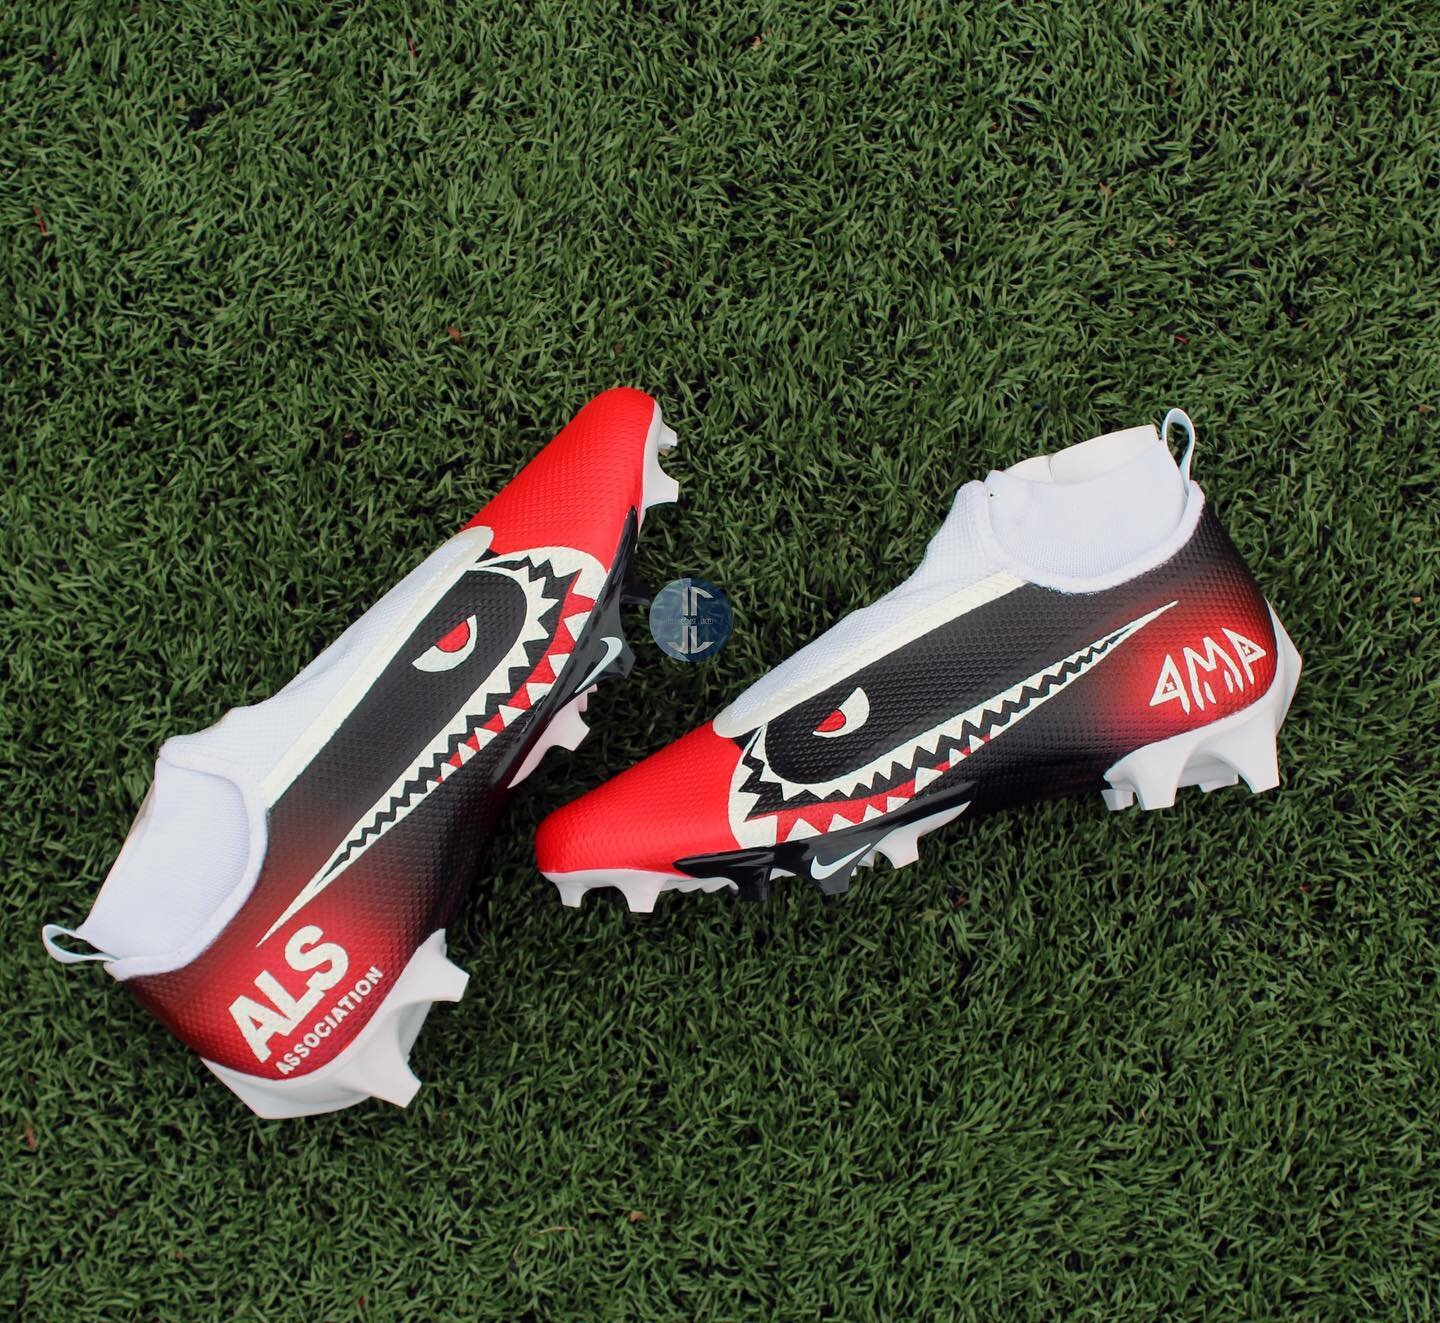 Back again for my favorite time of year; My Cause My Cleats with my guy @_primetime39. As always we&rsquo;re honoring his father SSGT Wallace, who served 21 years in the Air Force, with the classic Warhawk theme. Watch for Levi rocking these cleats o